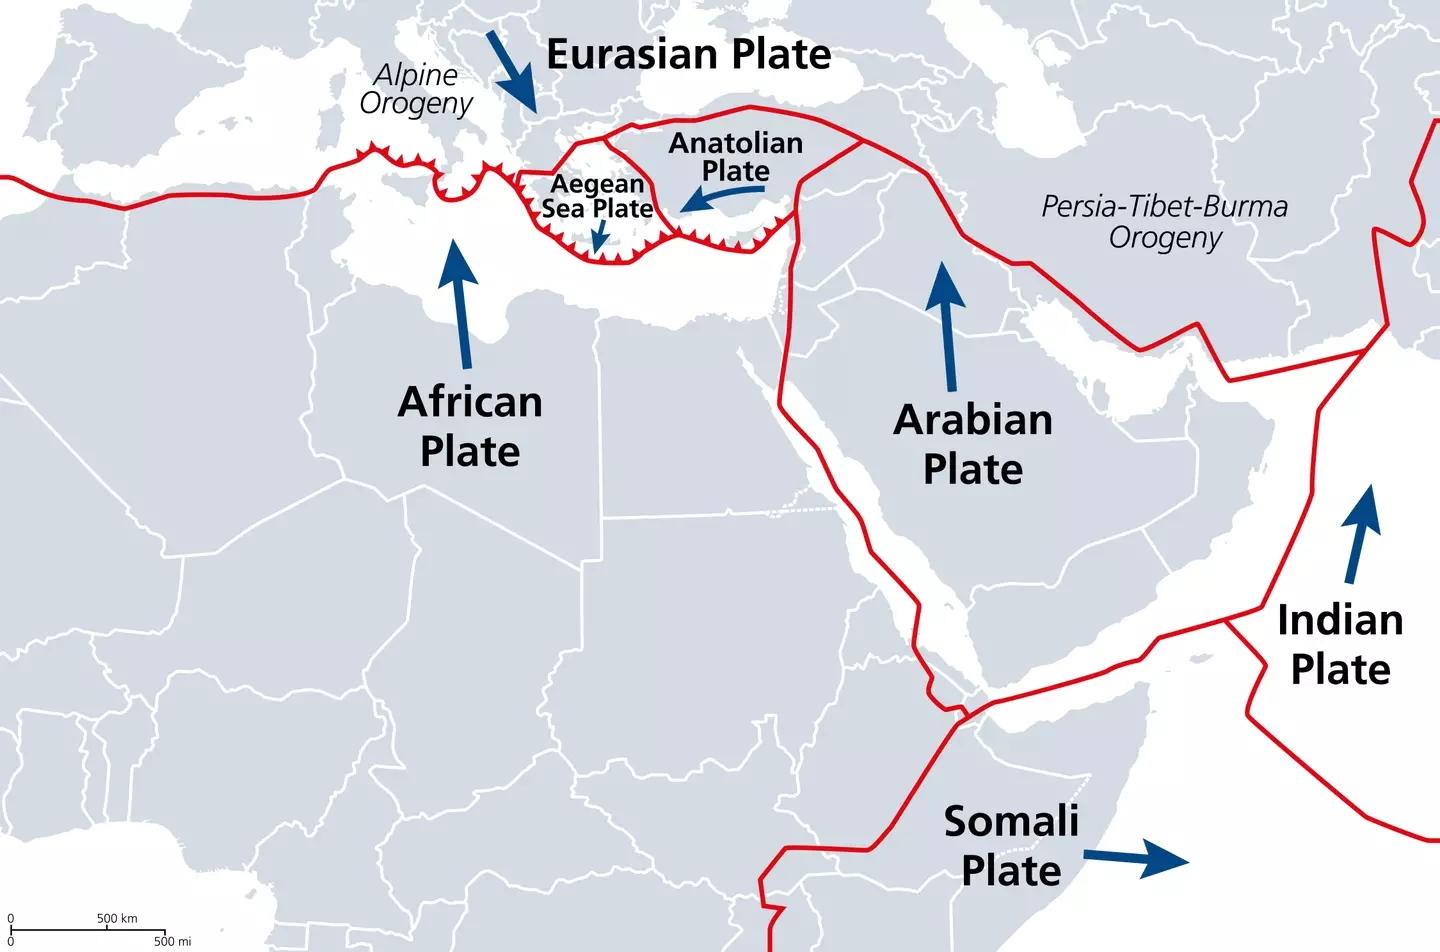 The crack resides on the borders of the boundaries of the African, Arabian and Somali tectonic plates.